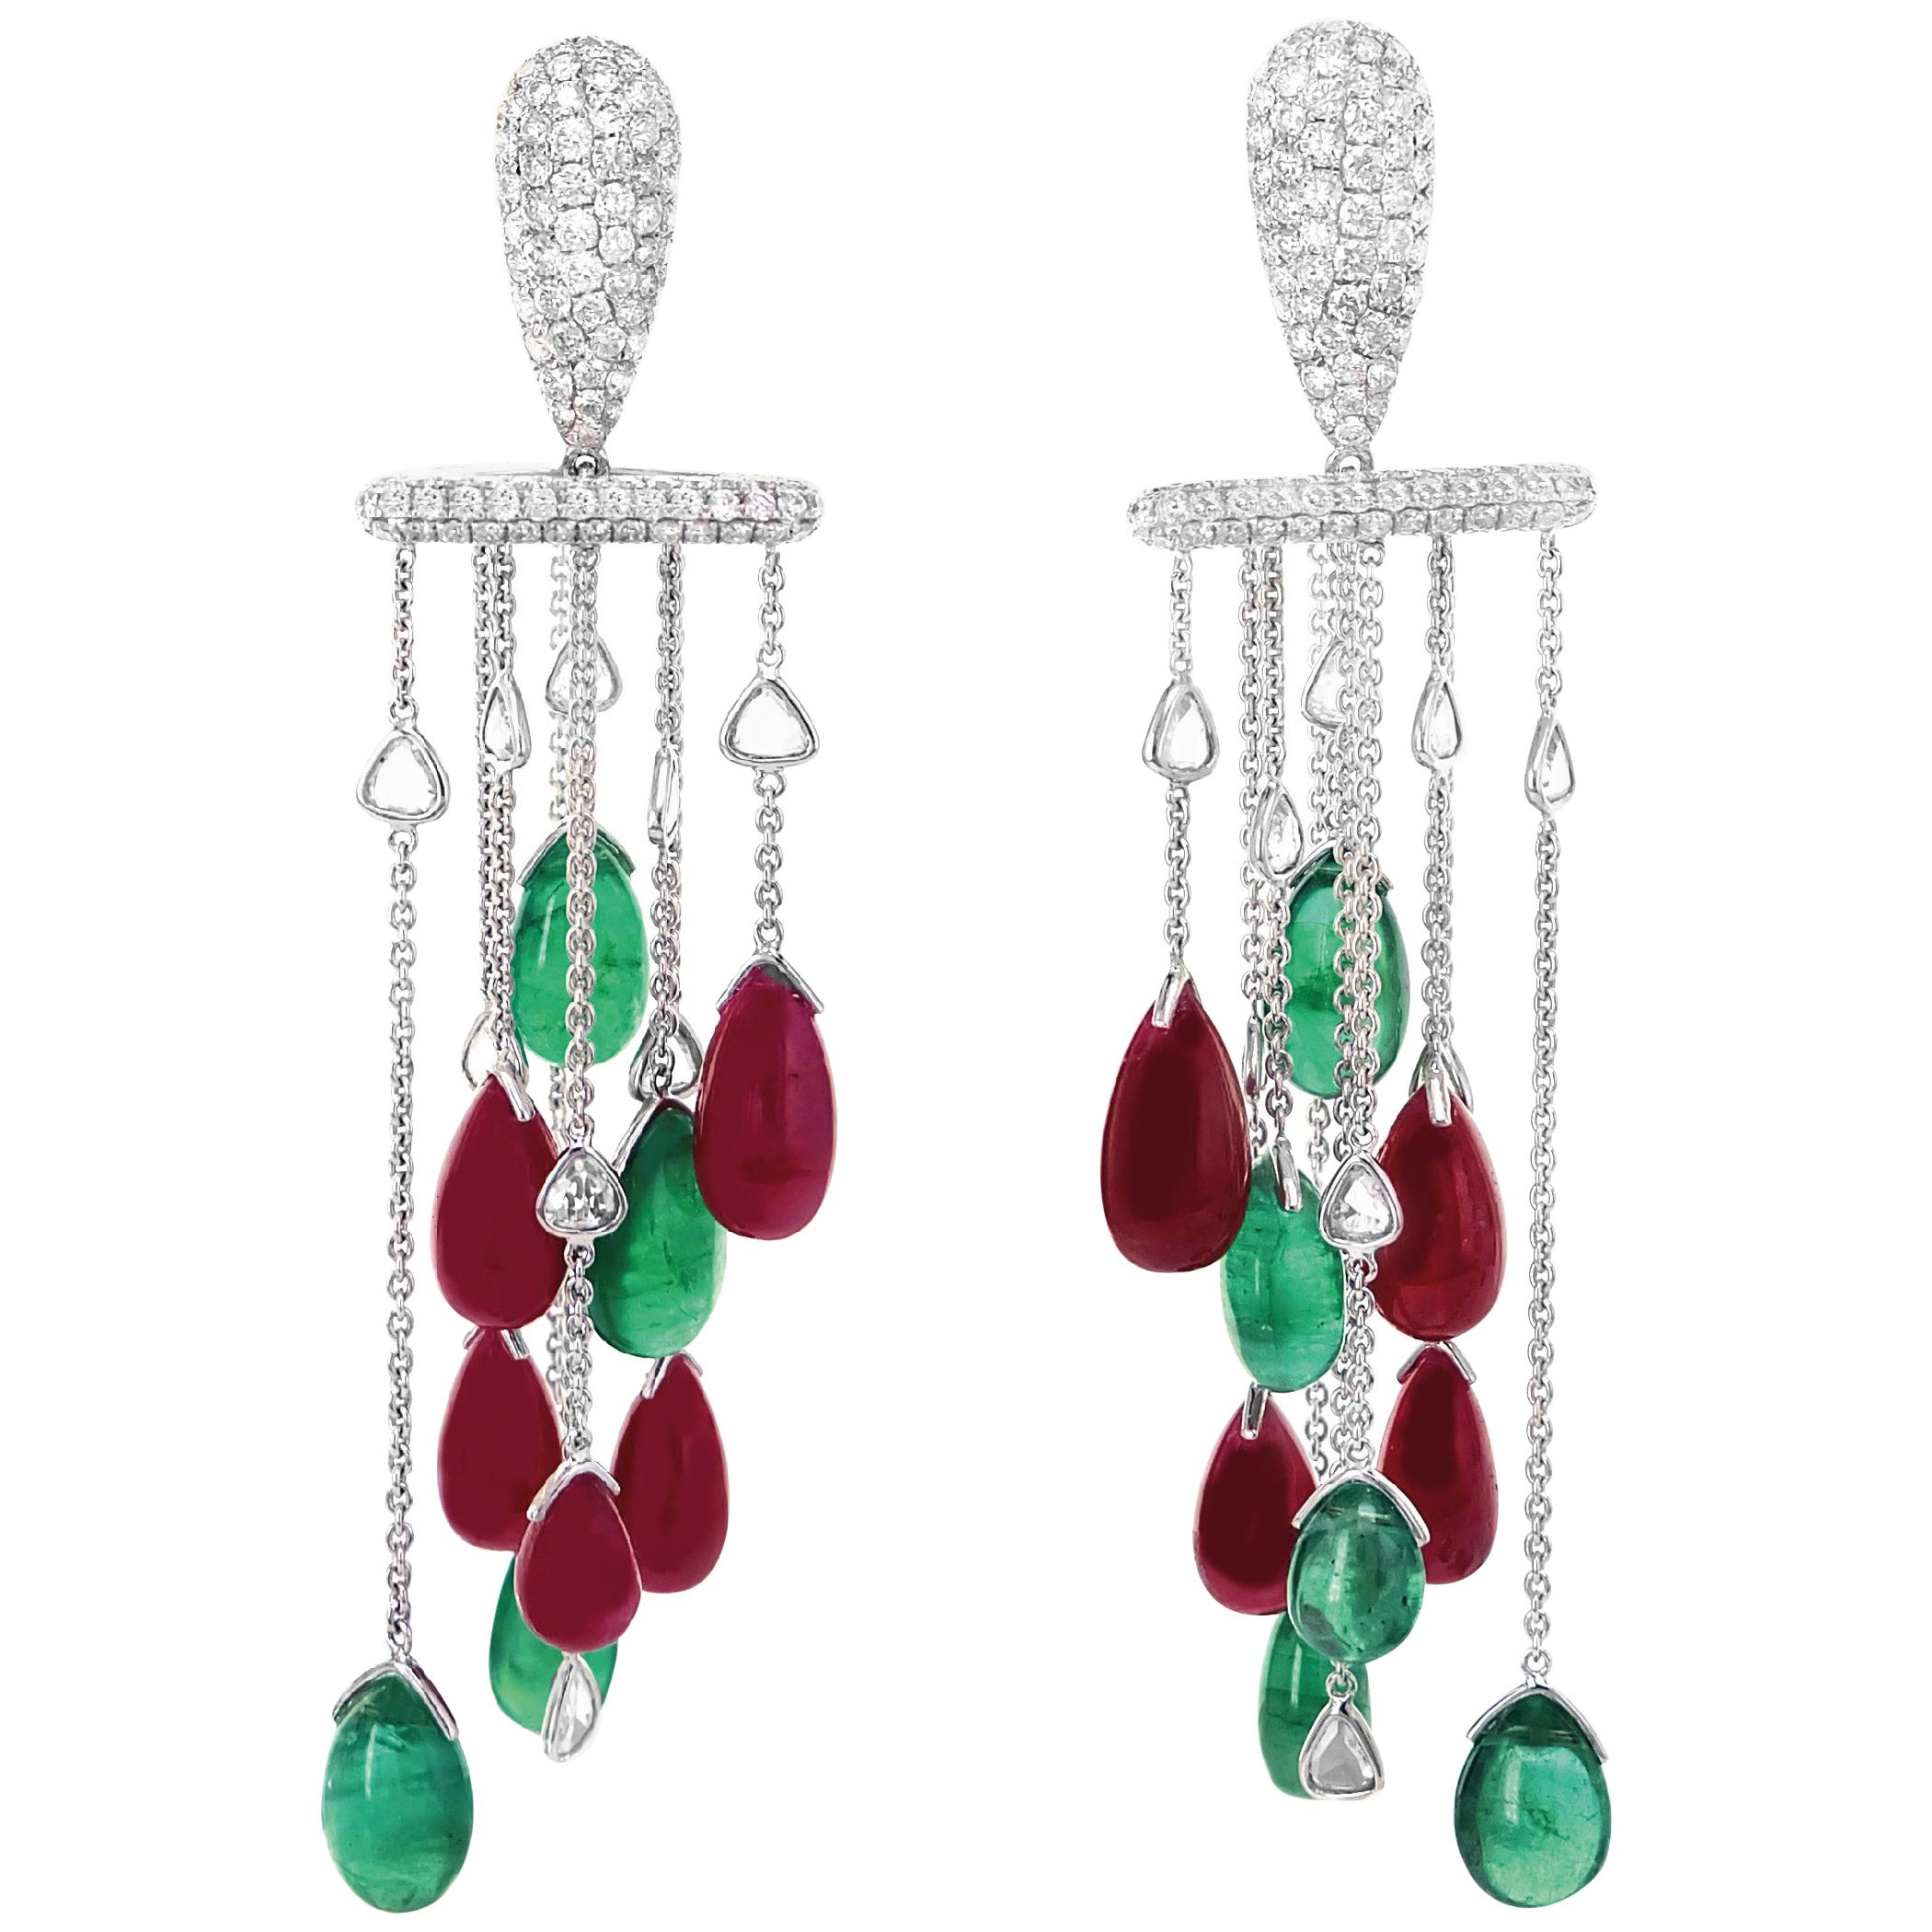 'Equilibrium' Earring Featured Ruby Emerald Diamond Cocktail Stunner